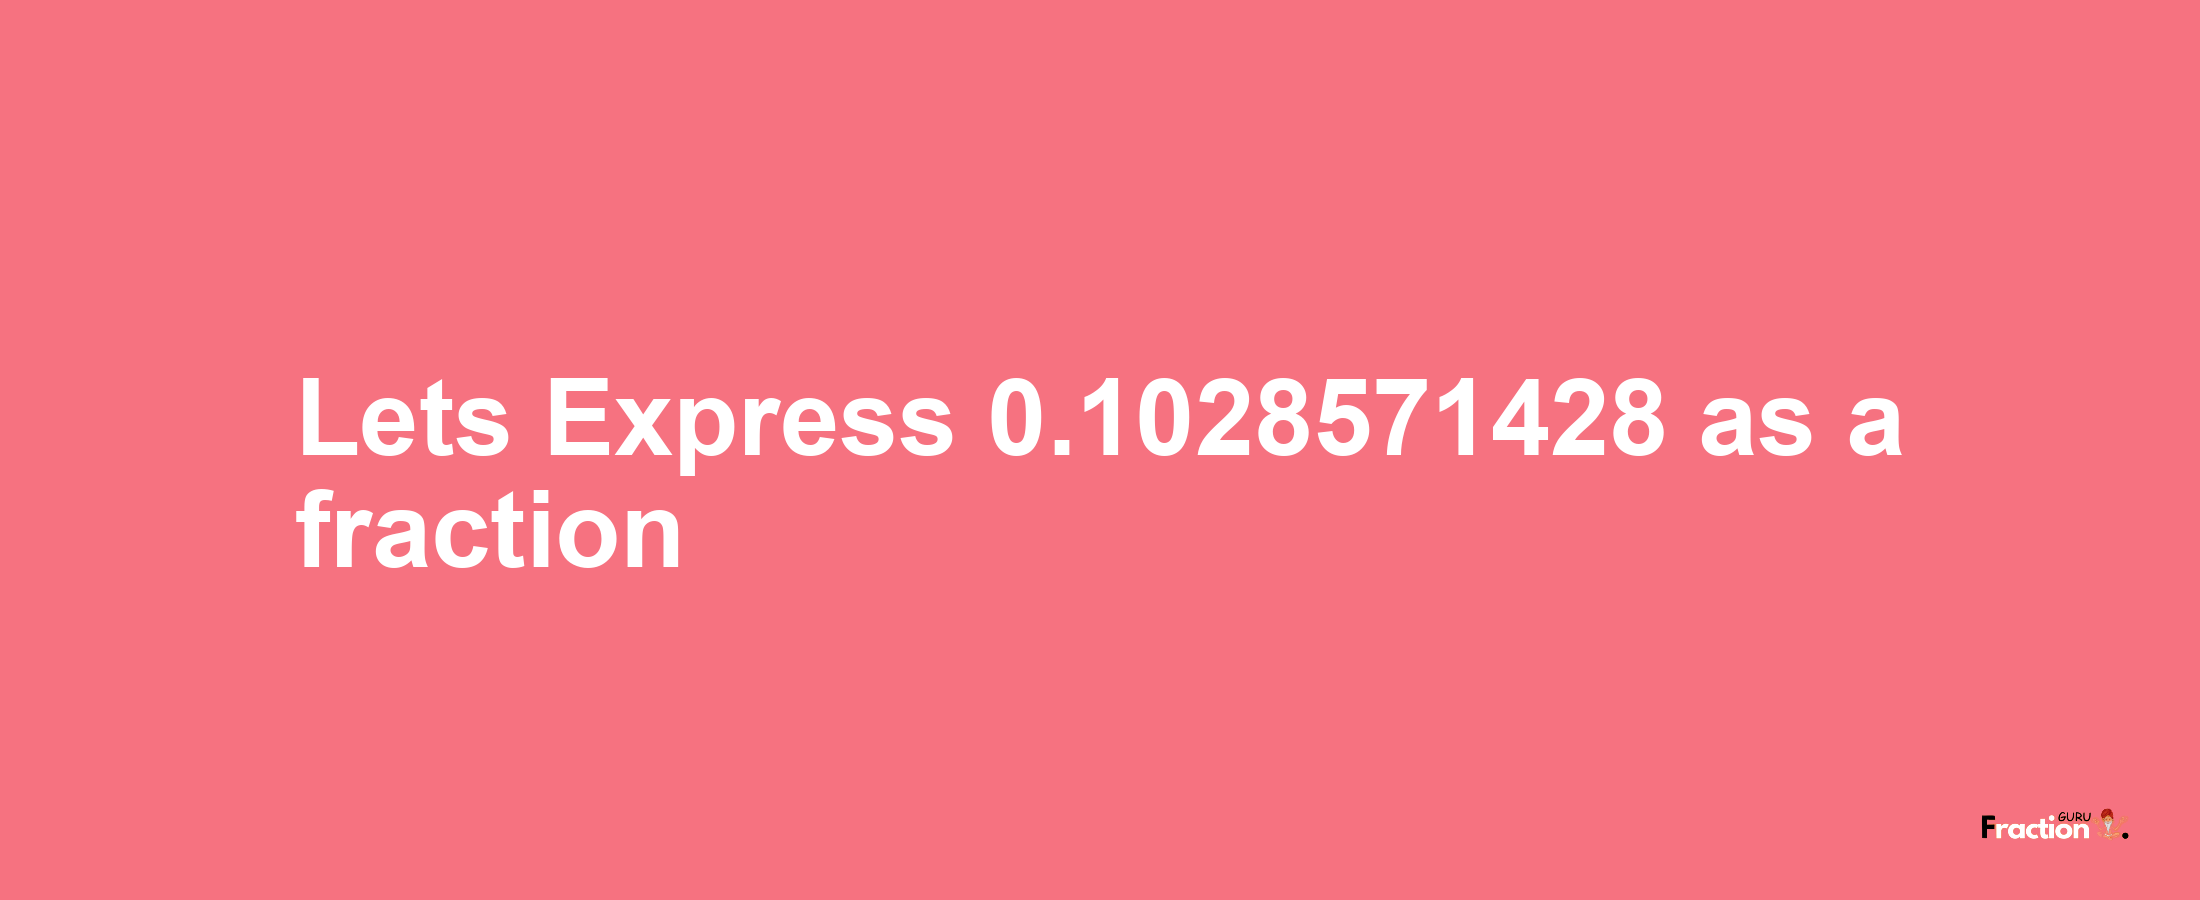 Lets Express 0.1028571428 as afraction